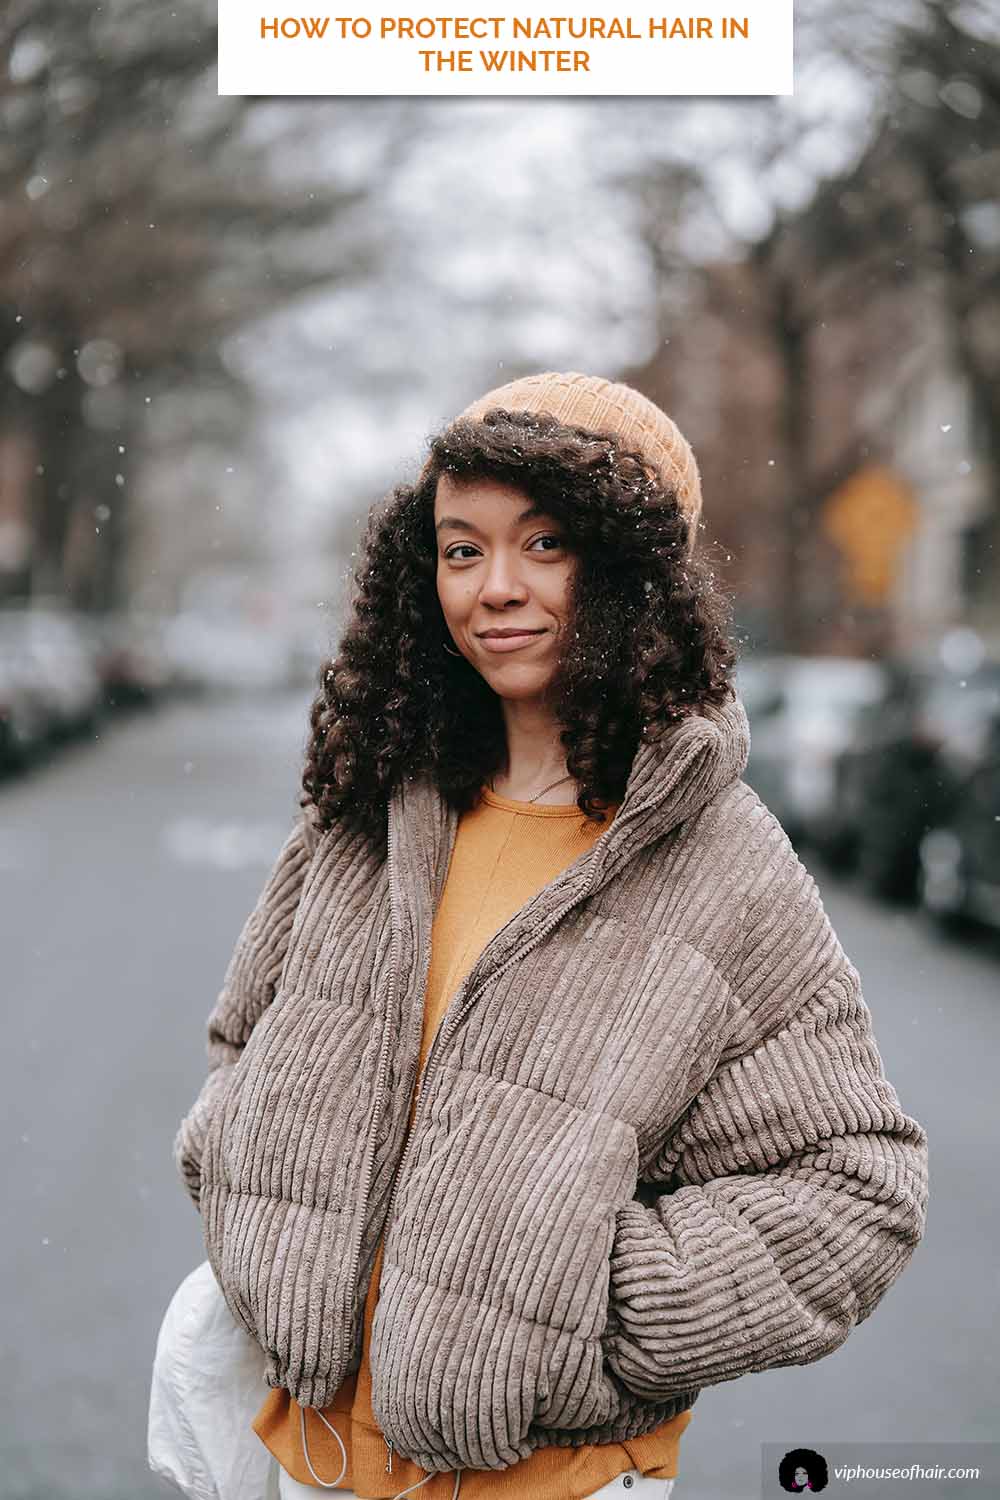 How To Protect Natural Hair In The Winter